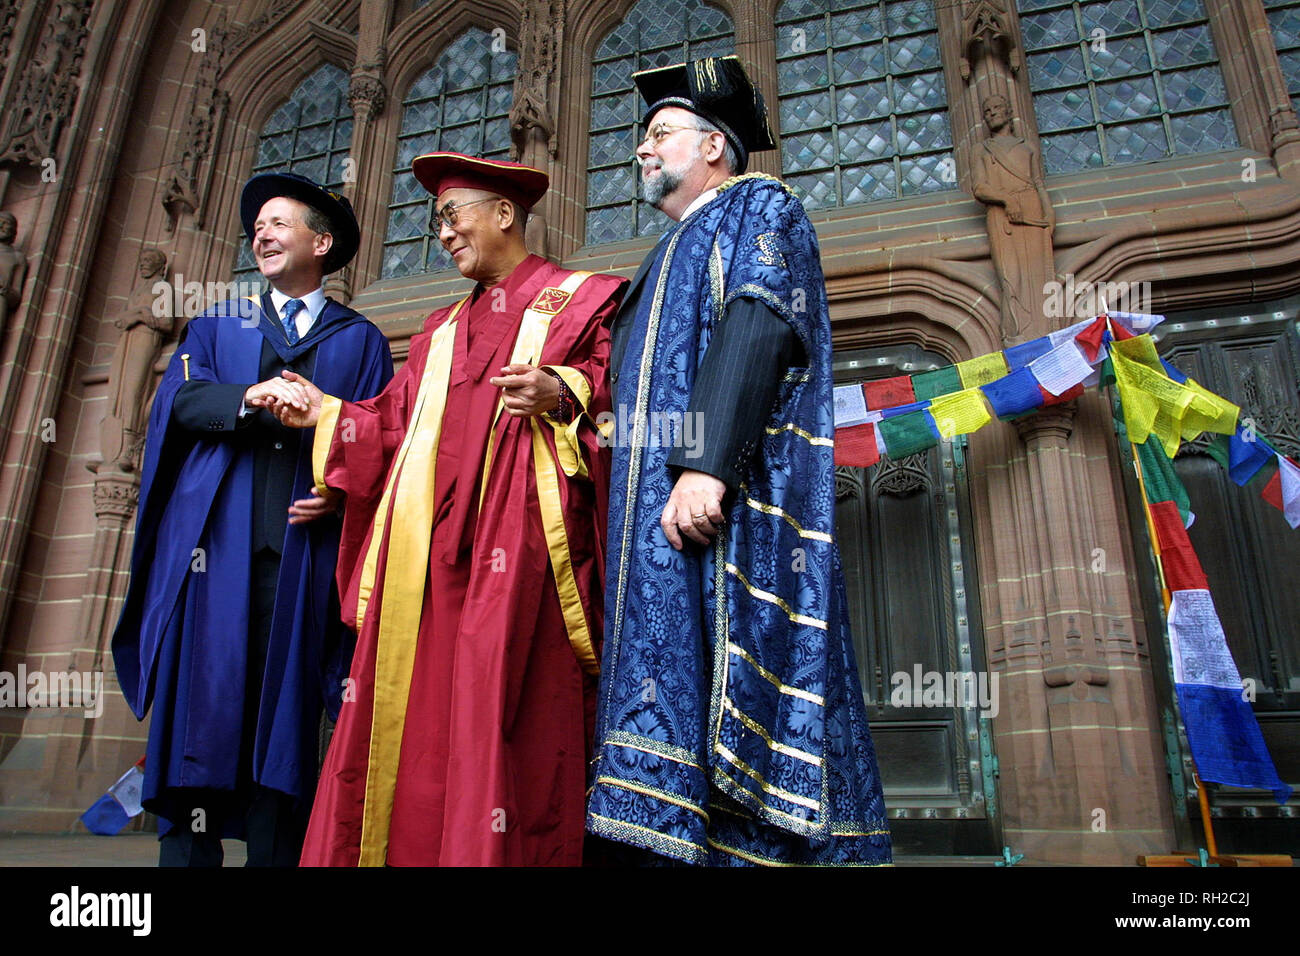 Wearing a specially designed robe for the occasion, His Holiness the Dalai Lama is welcomed by Lord David Alton (left, who leads JMU's Foundation for Citizenship) and Professor Michael Brown (vice chancellor of JMU) on the steps of Liverpool's Anglican Cathedral as he arrives to address the audience and receive an Honorary Fellowship from Liverpool John Moores University. This engagement was the first on the Dalai Lama's week-long visit to the UK, his first for five years. Stock Photo